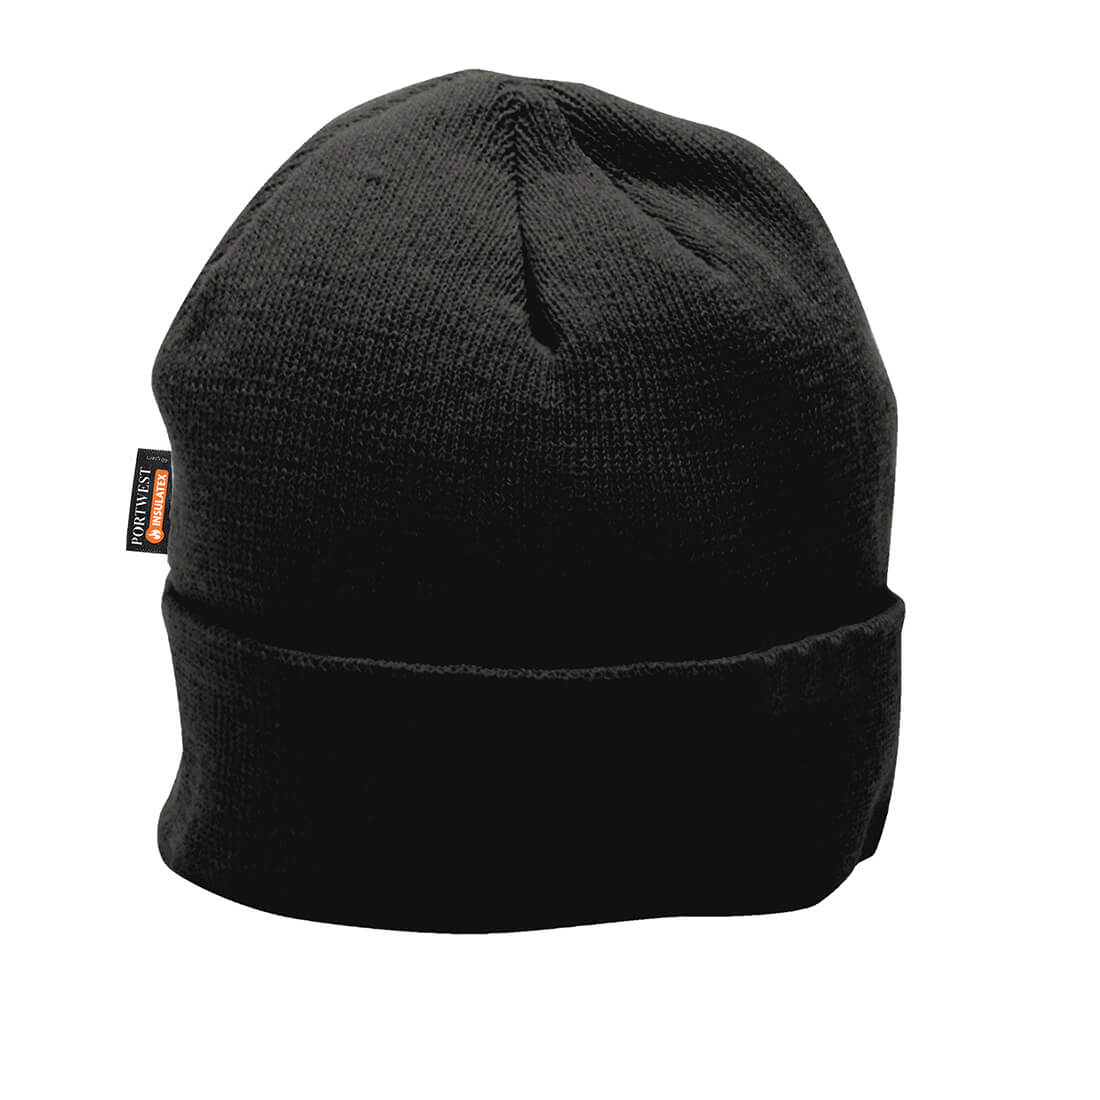 Image of Portwest Insulatex Lined Knit Hat Black One Size